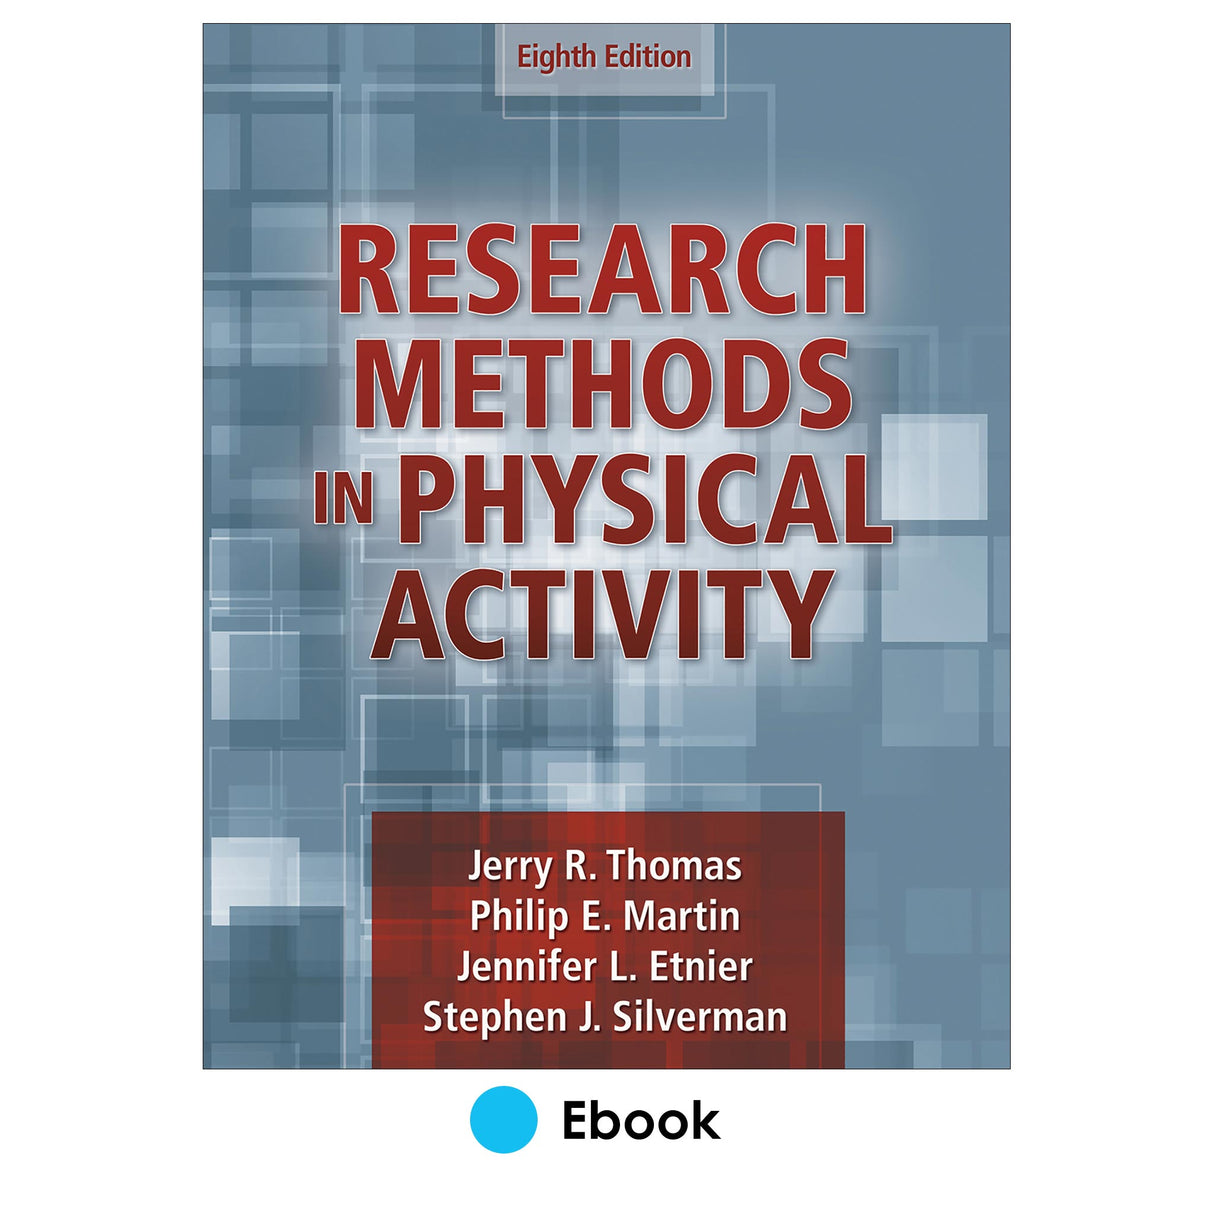 Research Methods in Physical Activity 8th Edition epub